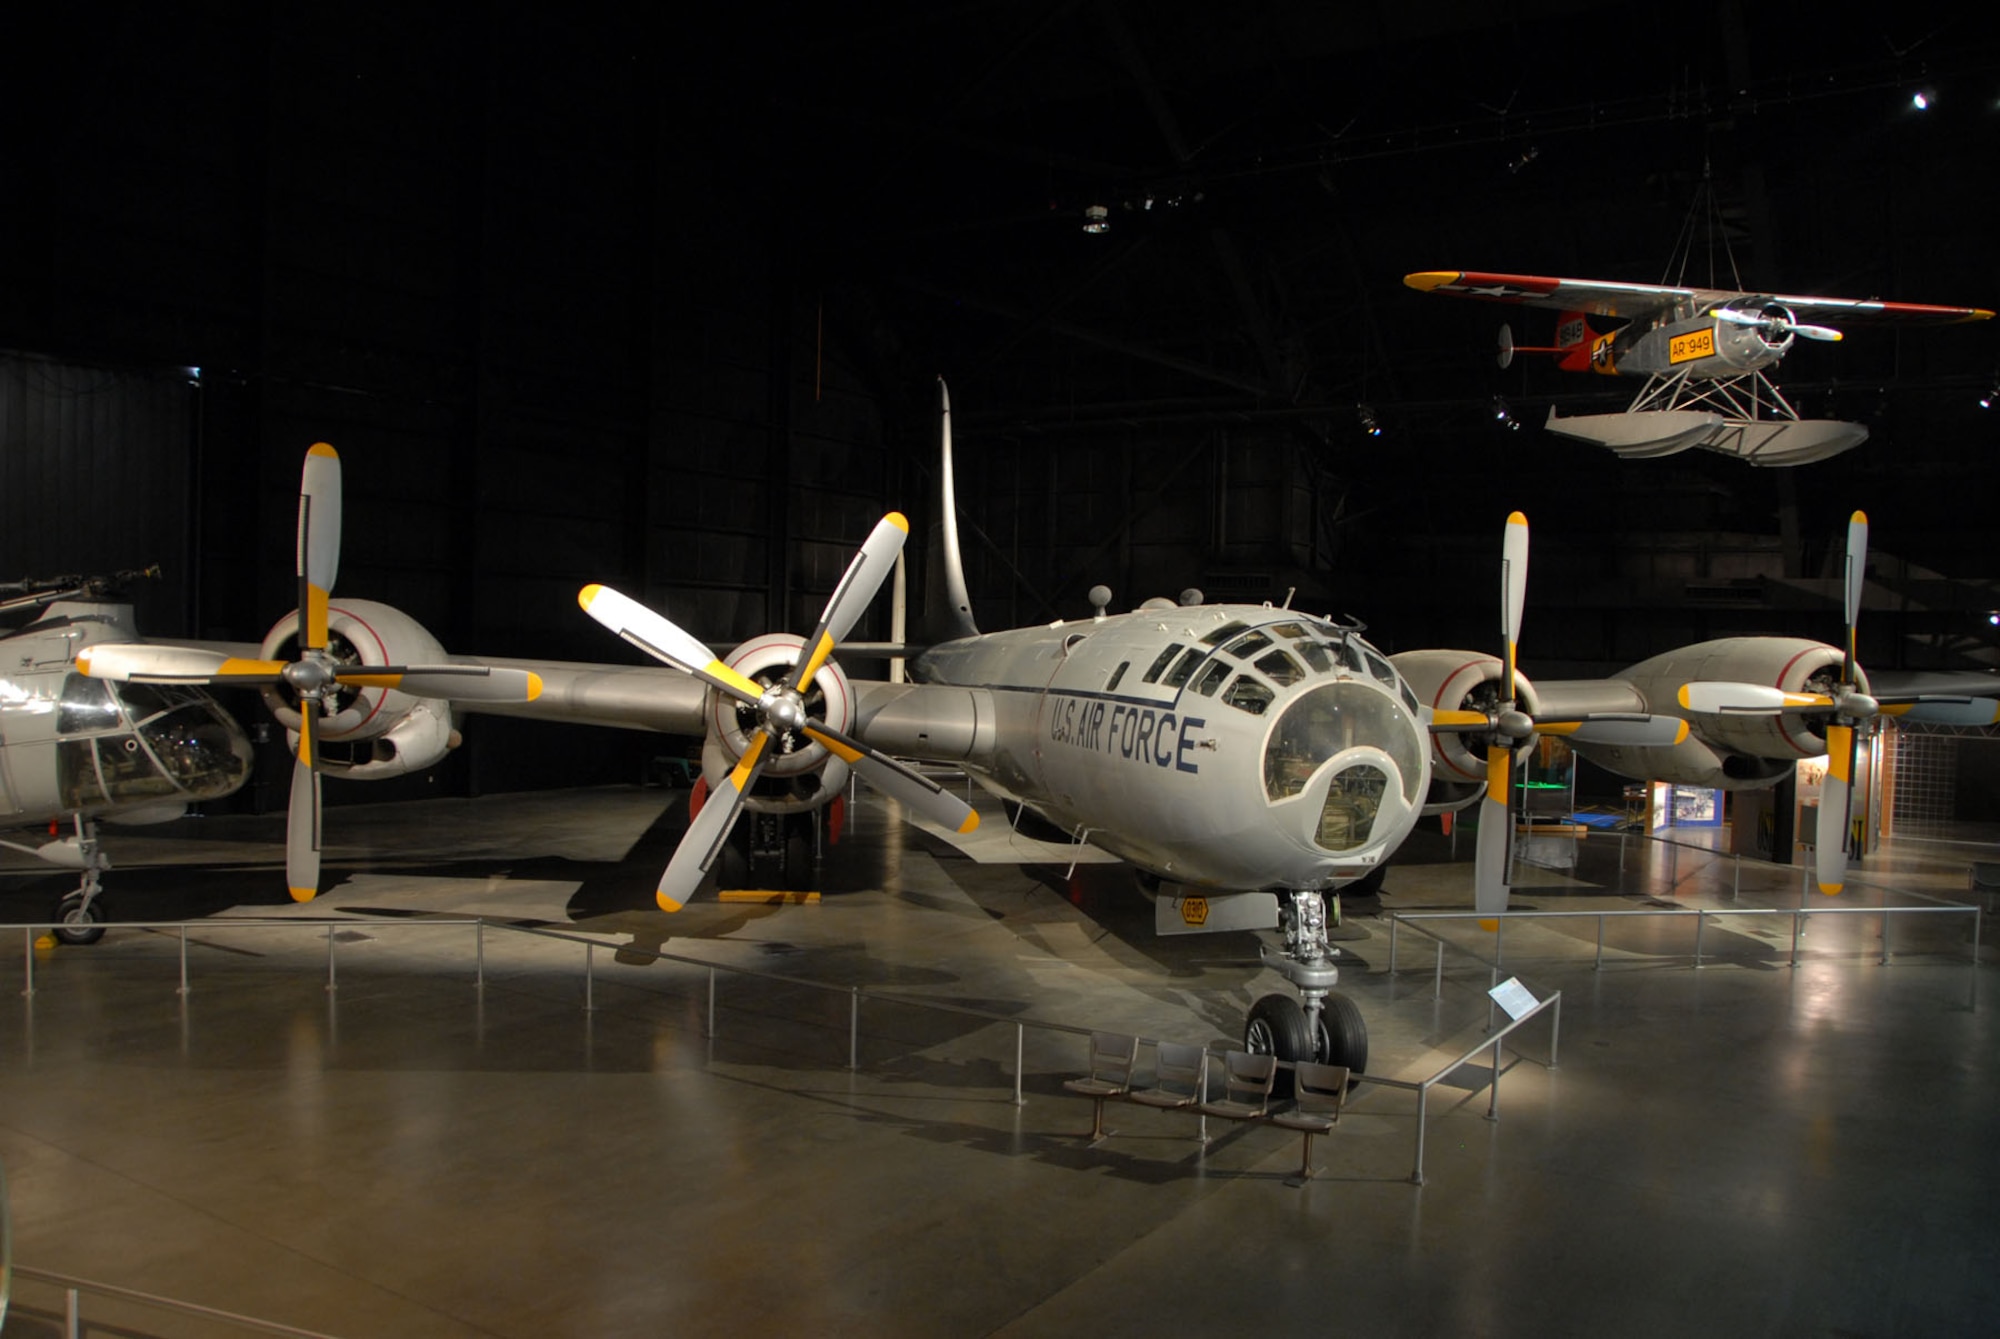 DAYTON, Ohio - The Boeing WB-50D Superfortress on display in the Cold War Gallery at the National Museum of the U.S. Air Force. (U.S. Air Force photo)